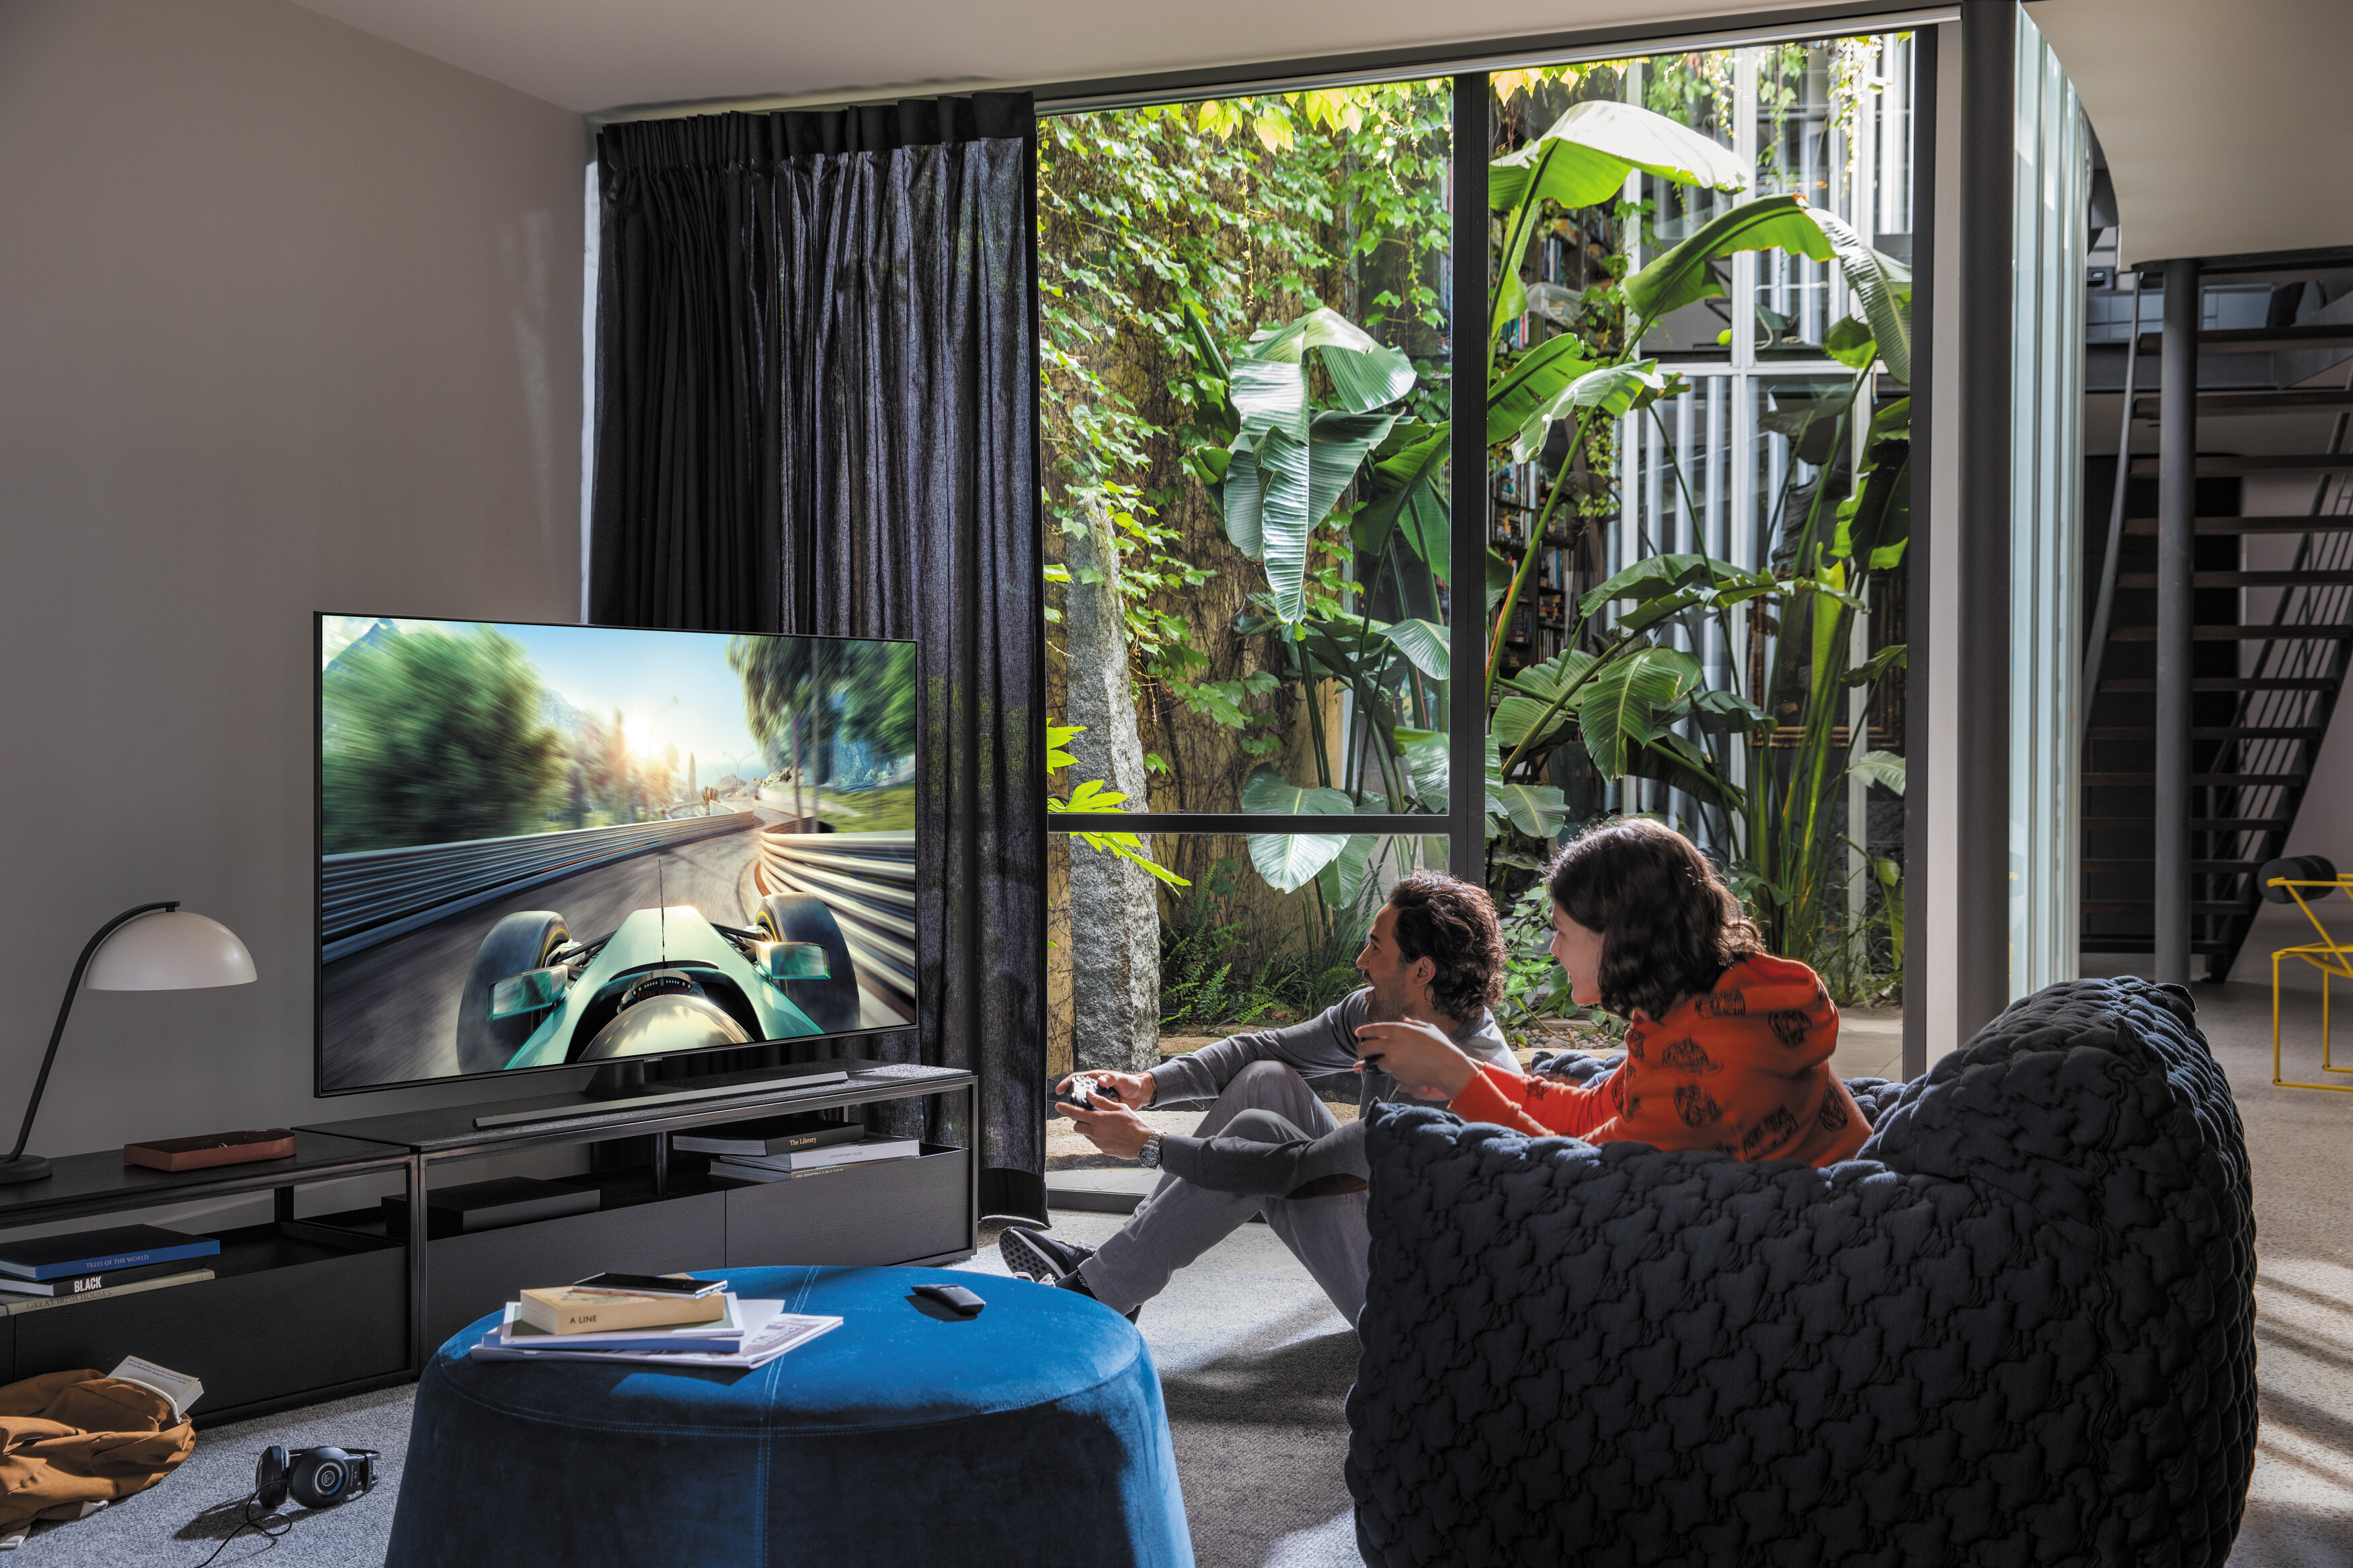 People playing video games on their new TV in a modern living area.